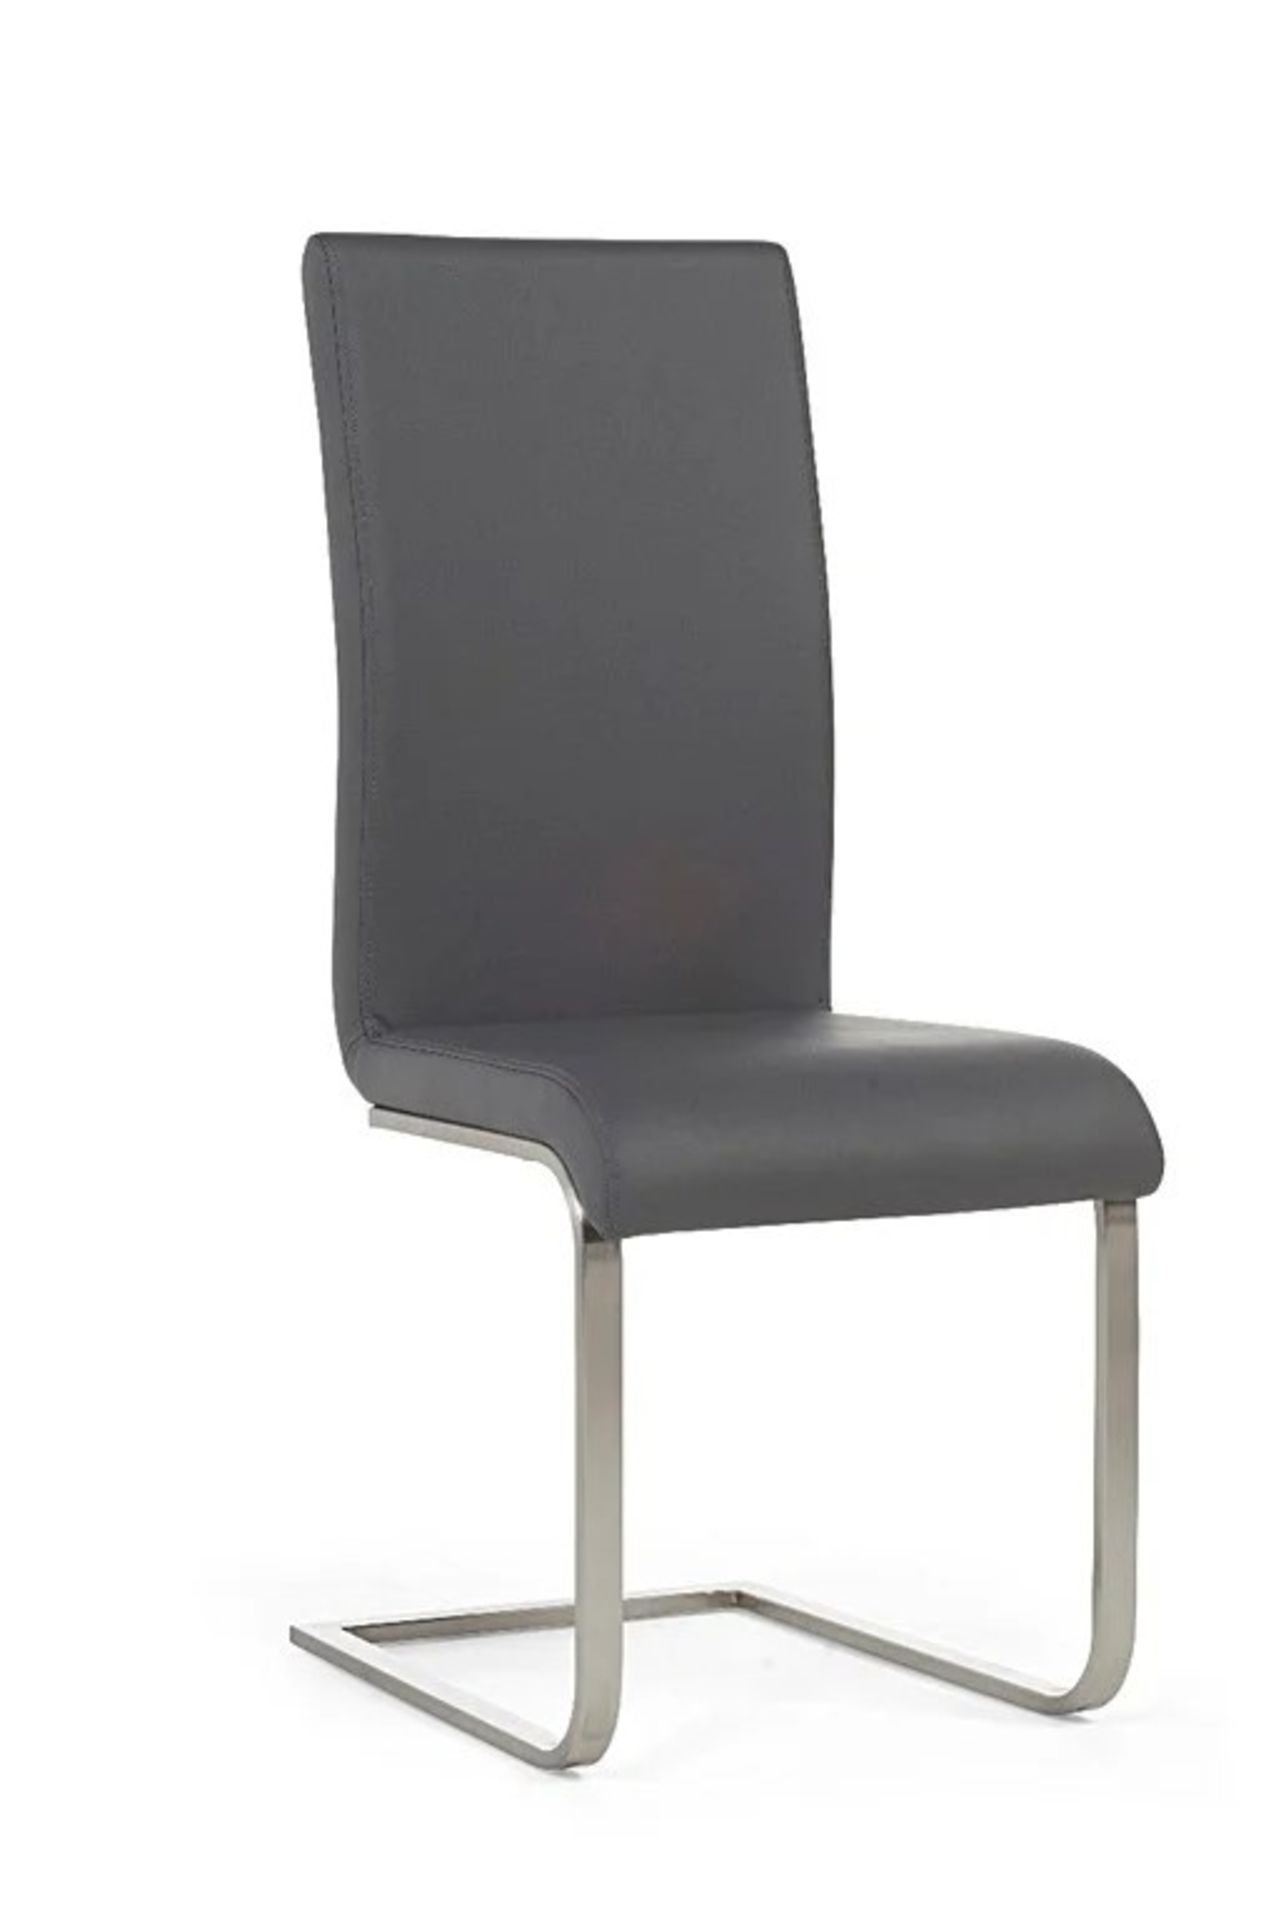 Malaga Grey Faux Leather Dining Chair Simplicity is the keynote of all true elegance. The minimalist